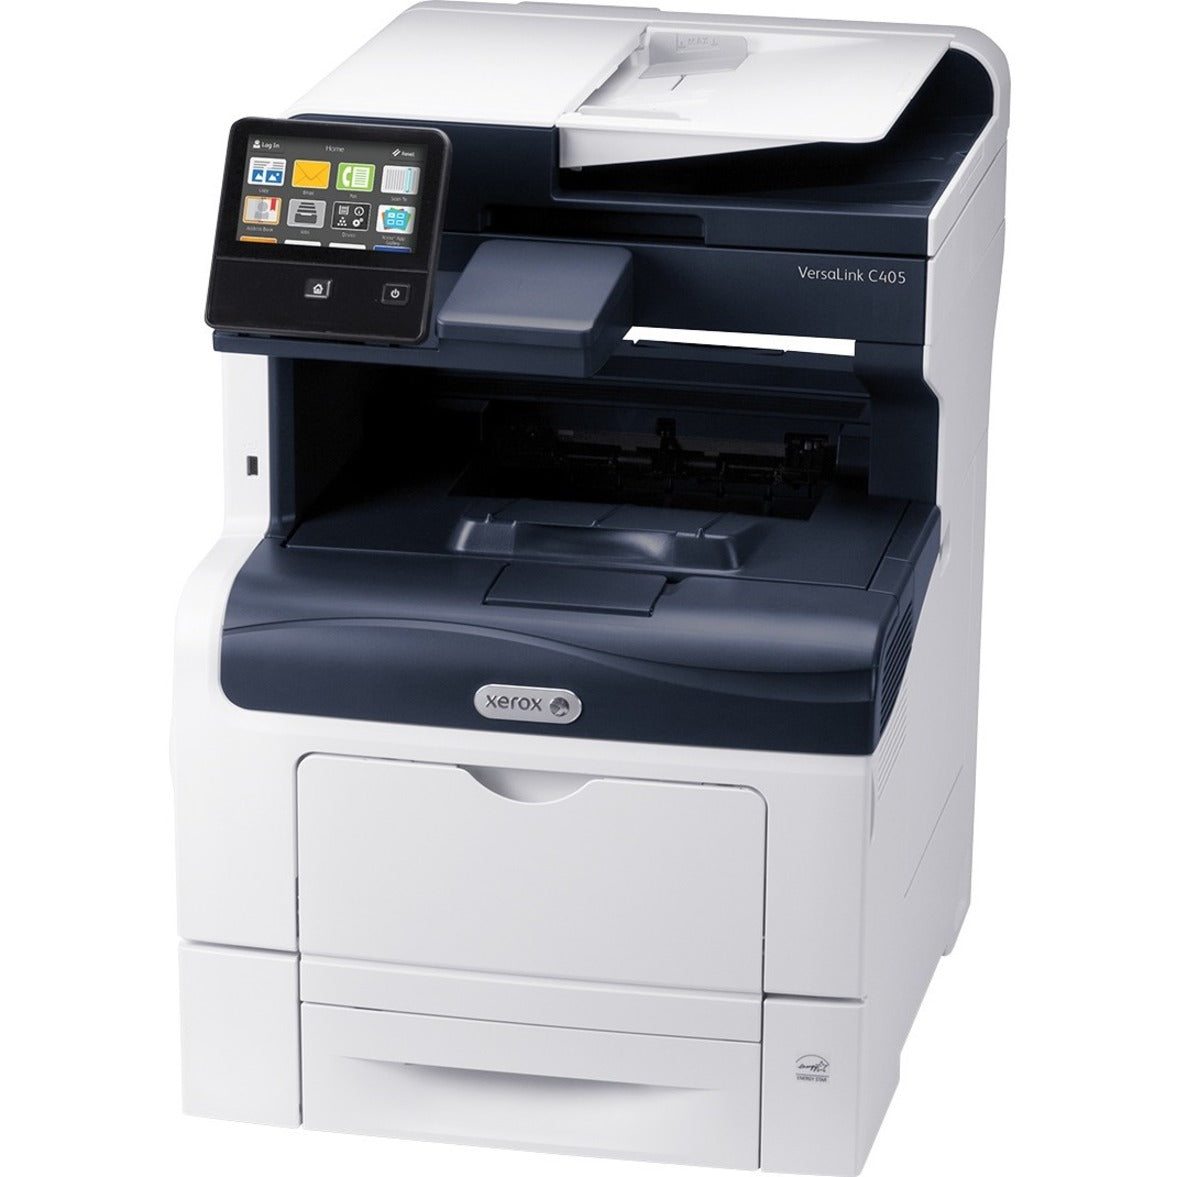 Xerox C405/YDN VersaLink C405 Color Multifunction Printer, Fax, Copy, Scan, 36ppm, 2-Sided Printing